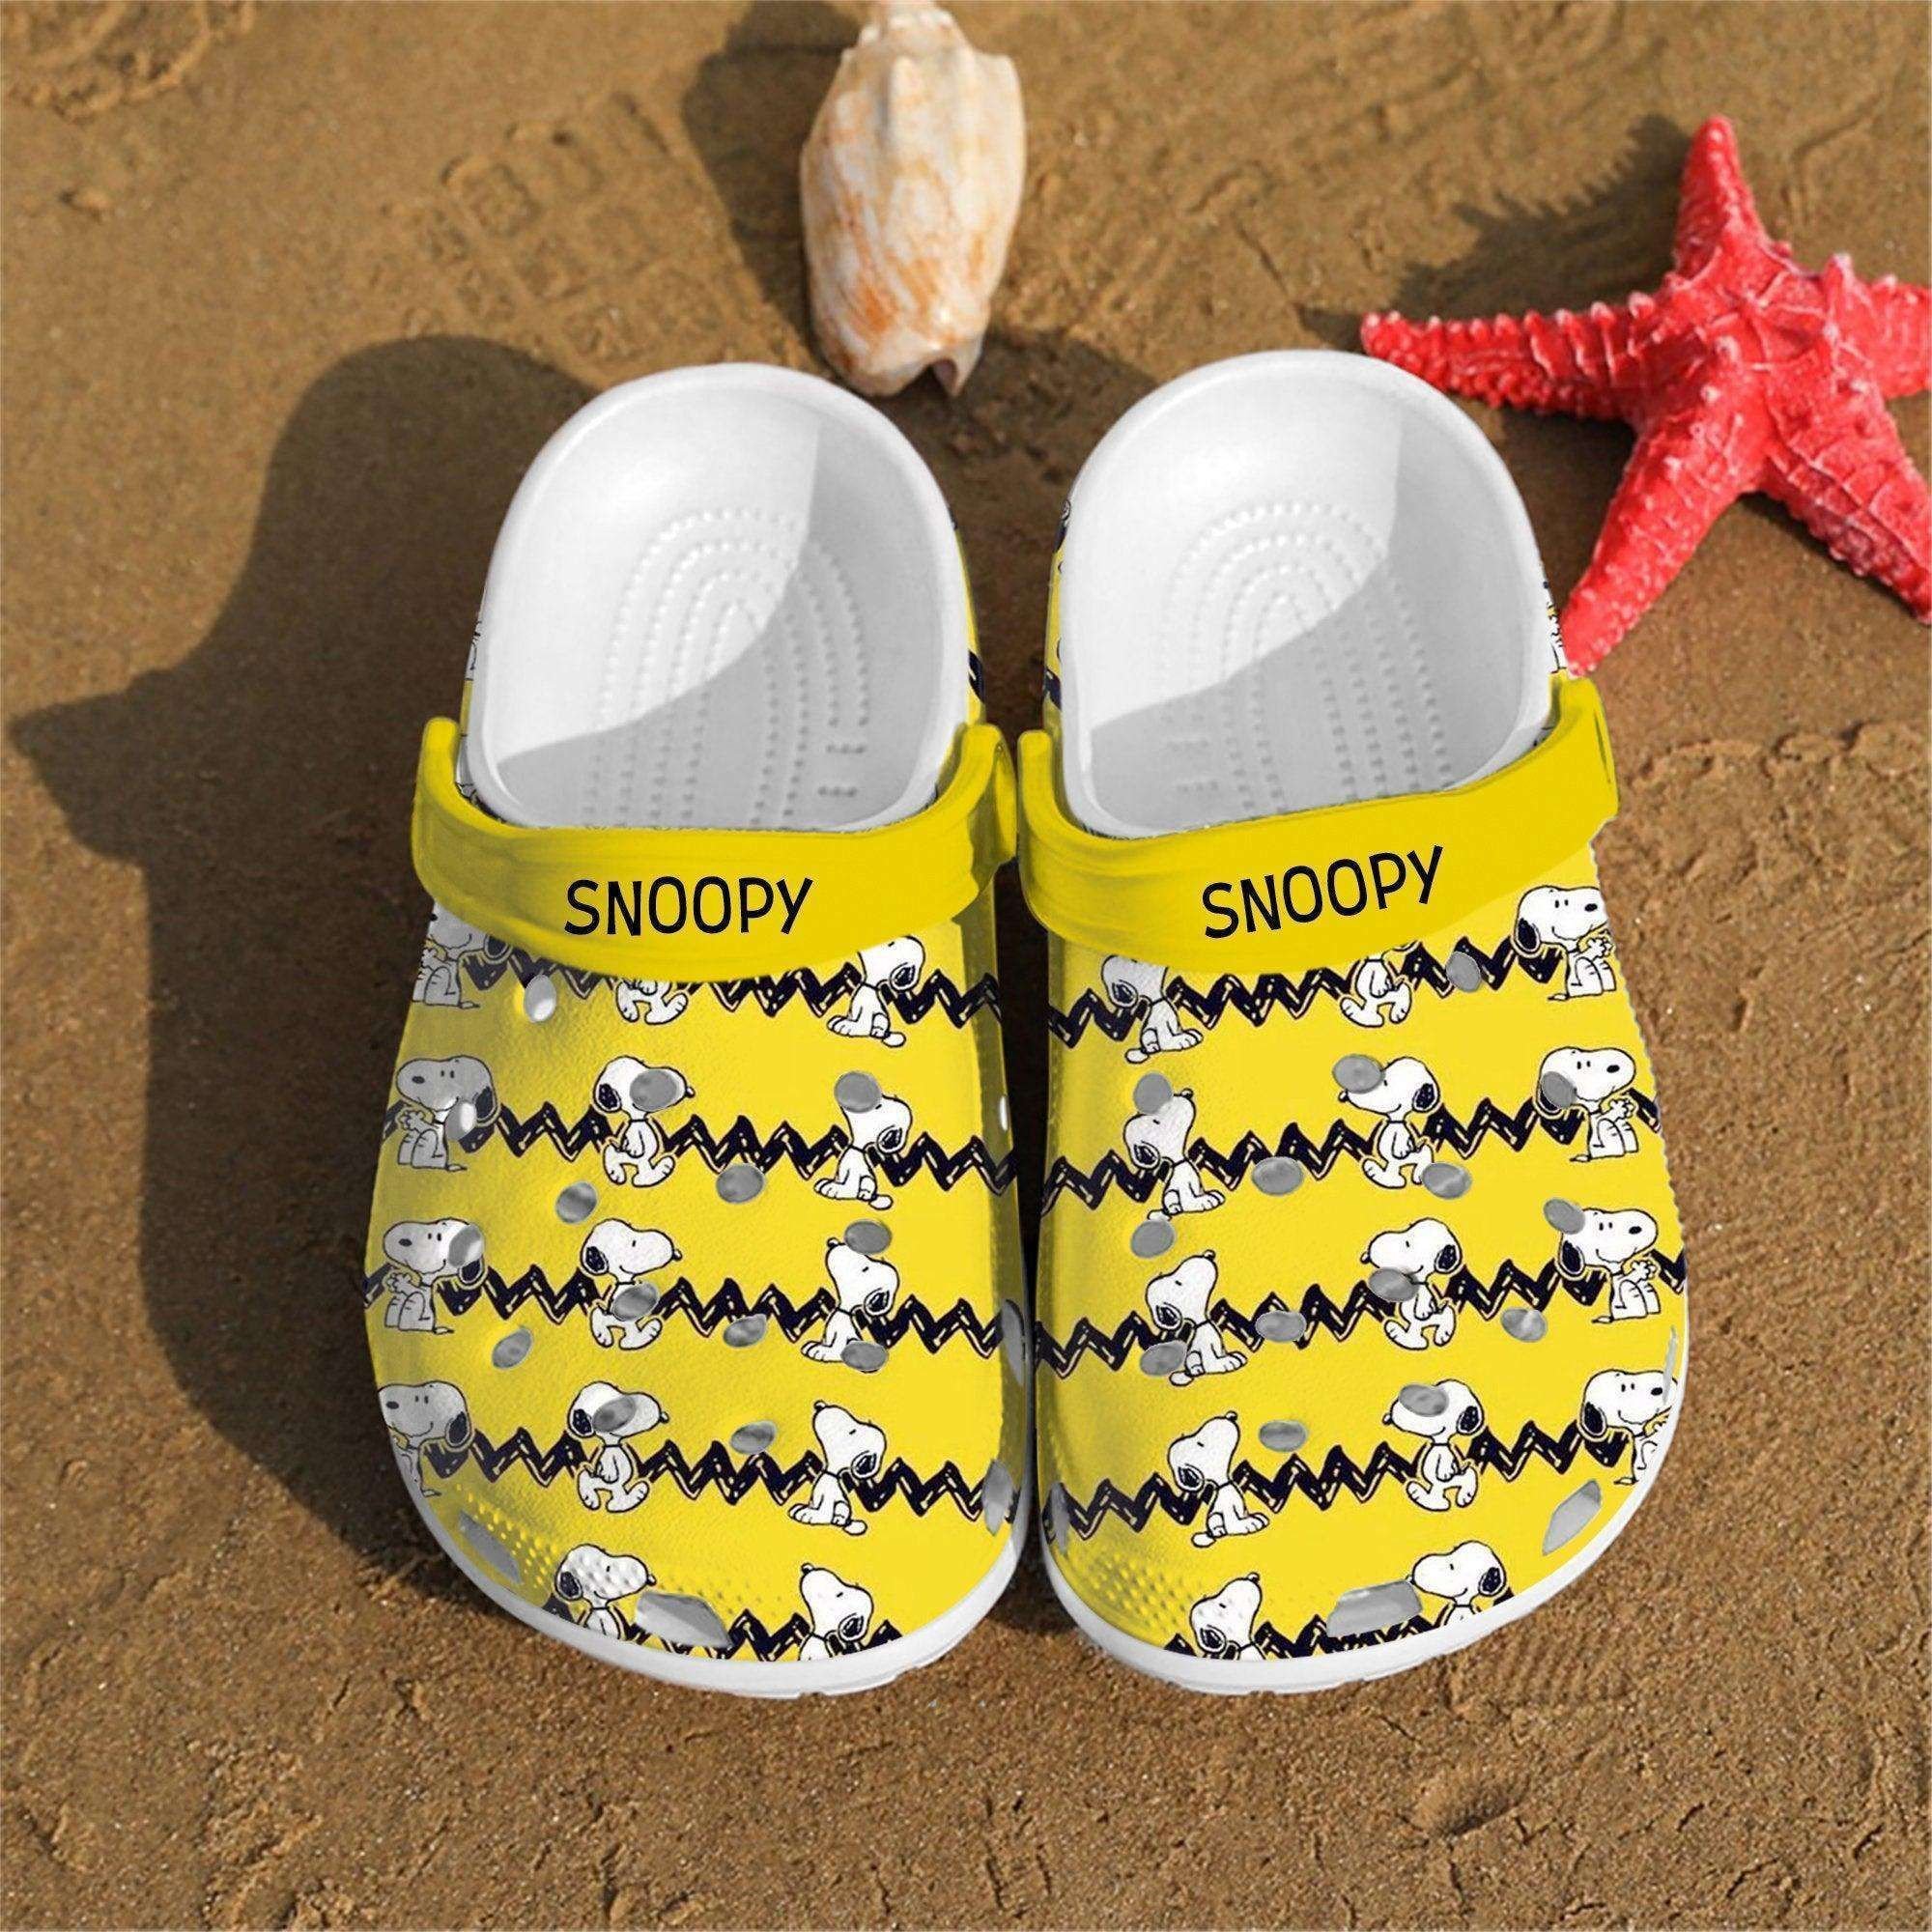 Snoopy Charlie Stickers Pattern Crocss Classic Clogs Shoes In Yellow & Black For Men Women Kids